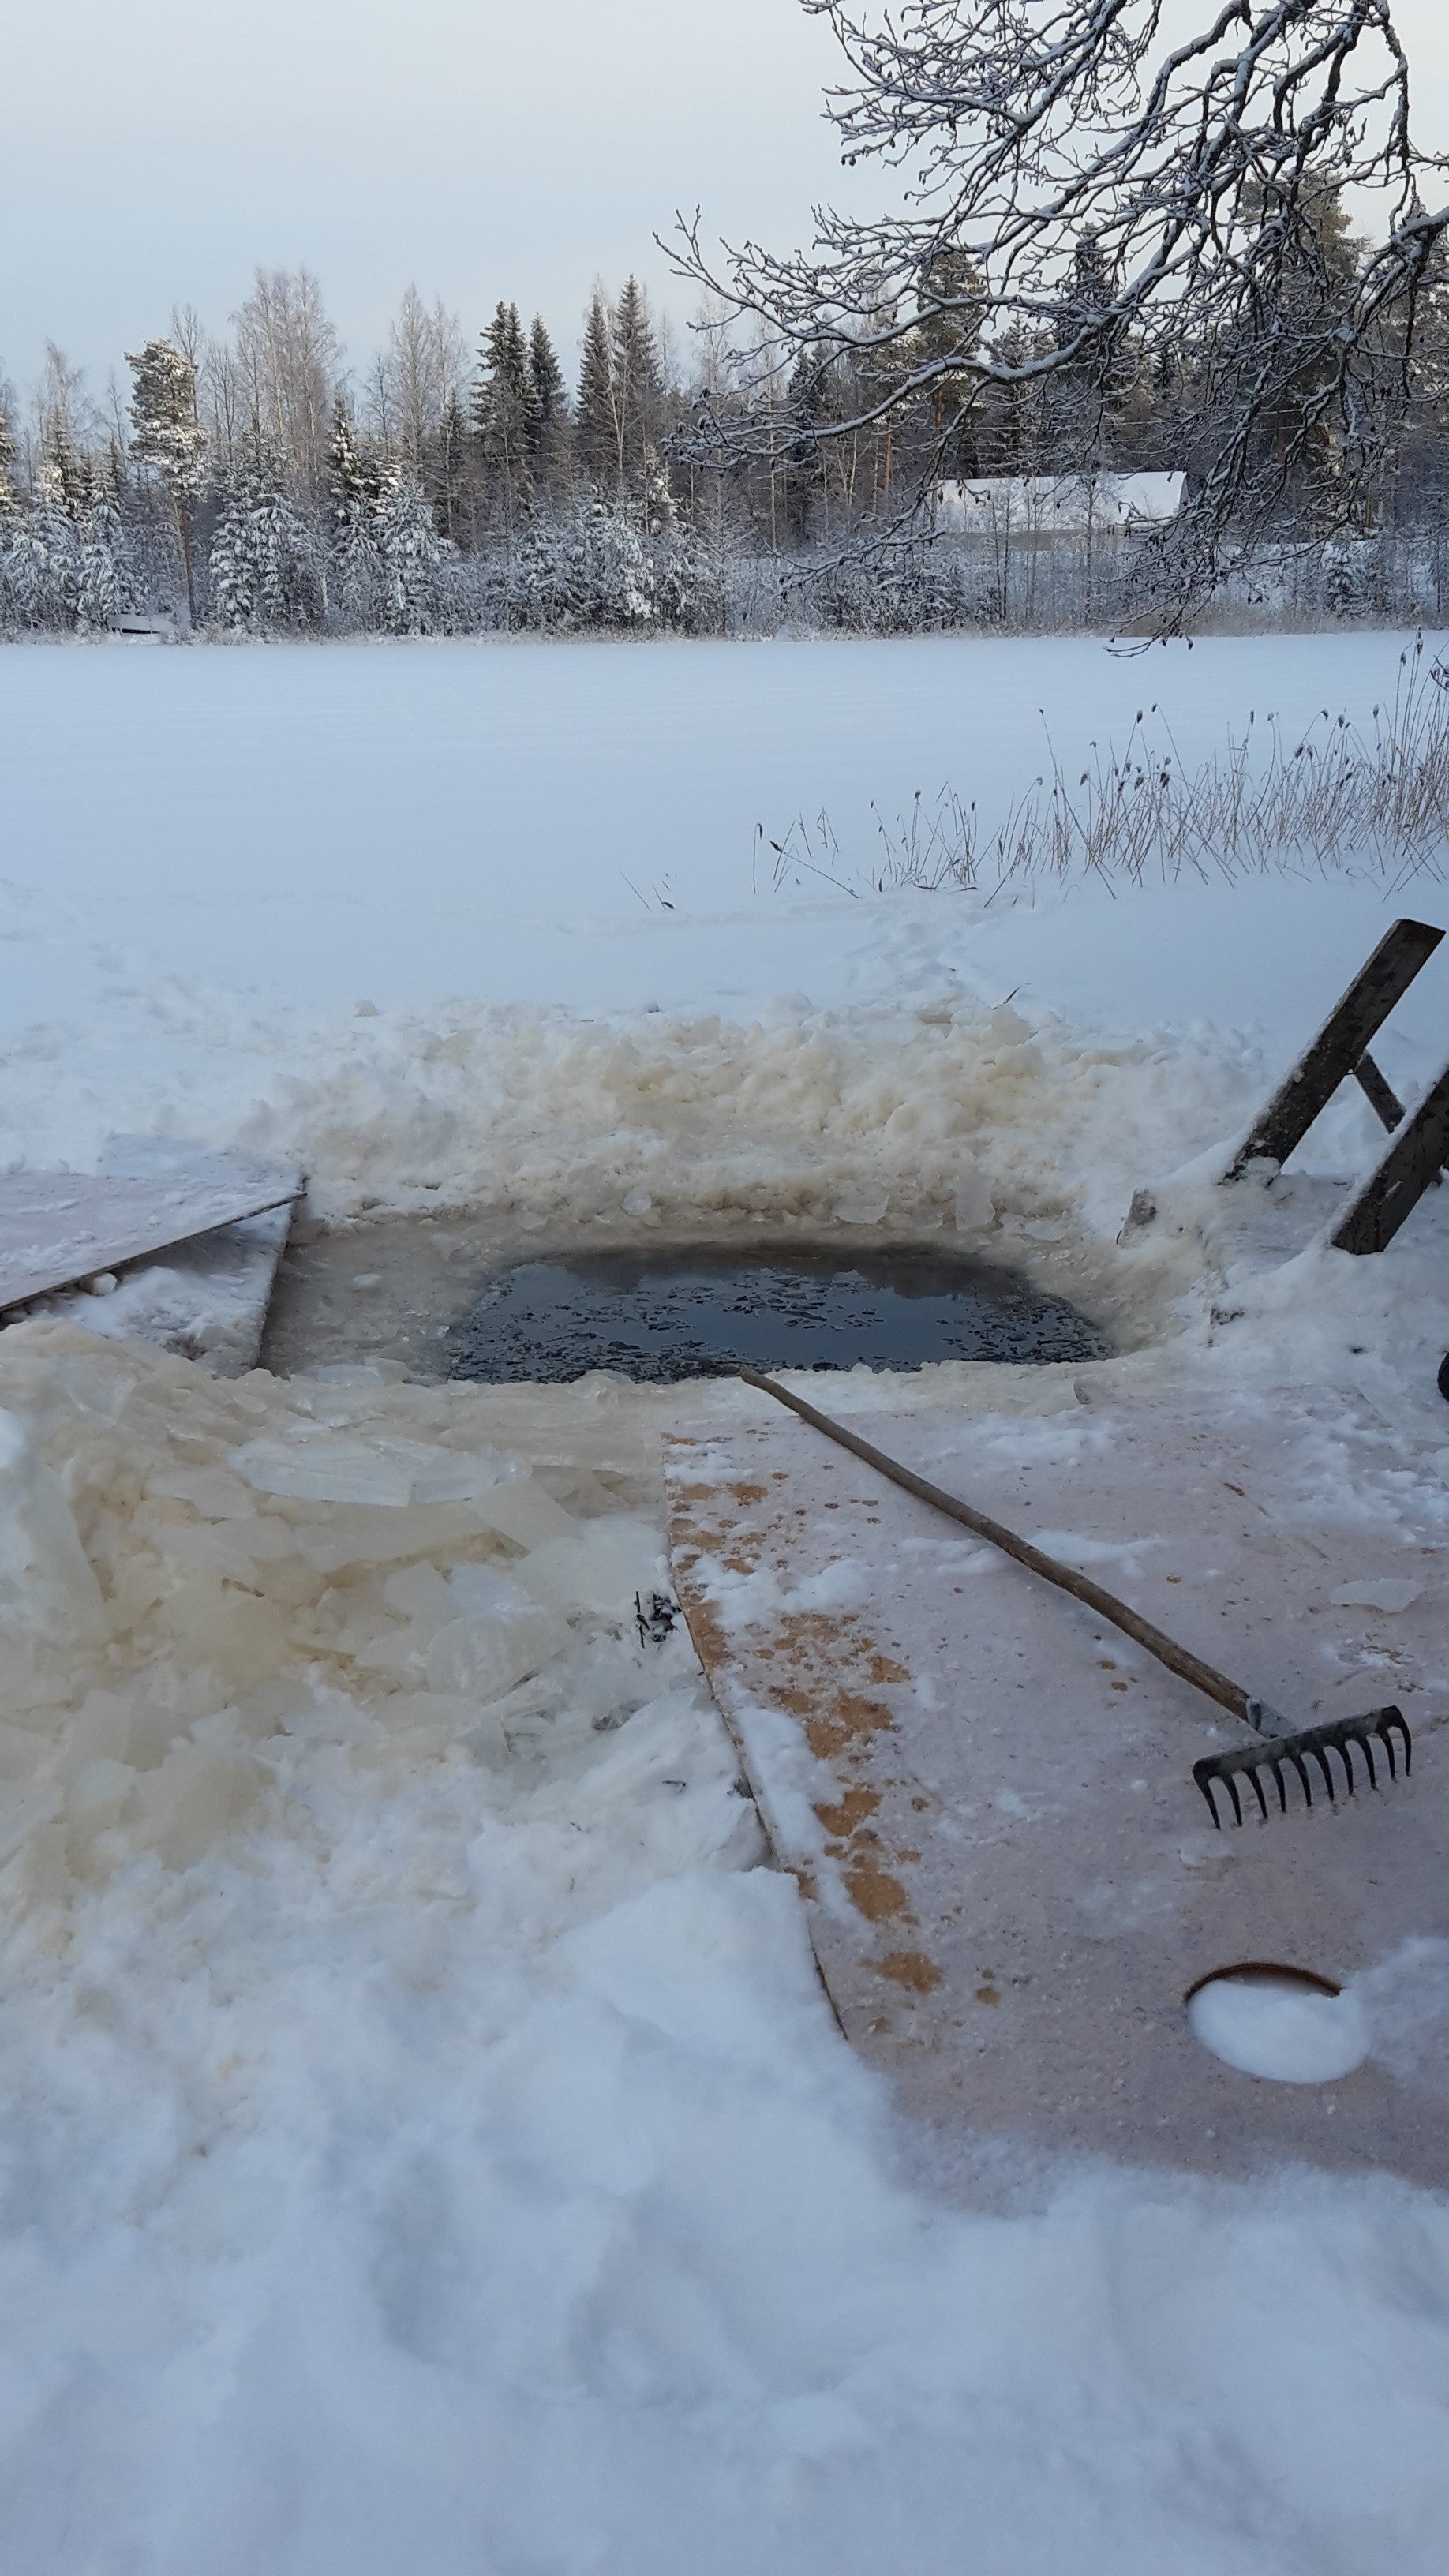 Bathing in an ice hole in a Finnish Lake after going to the sauna is a truly awakening experience. But why do lakes freeze over and why is there liquid water beneath it? Find out in this blog post at the Science of Travel Blog